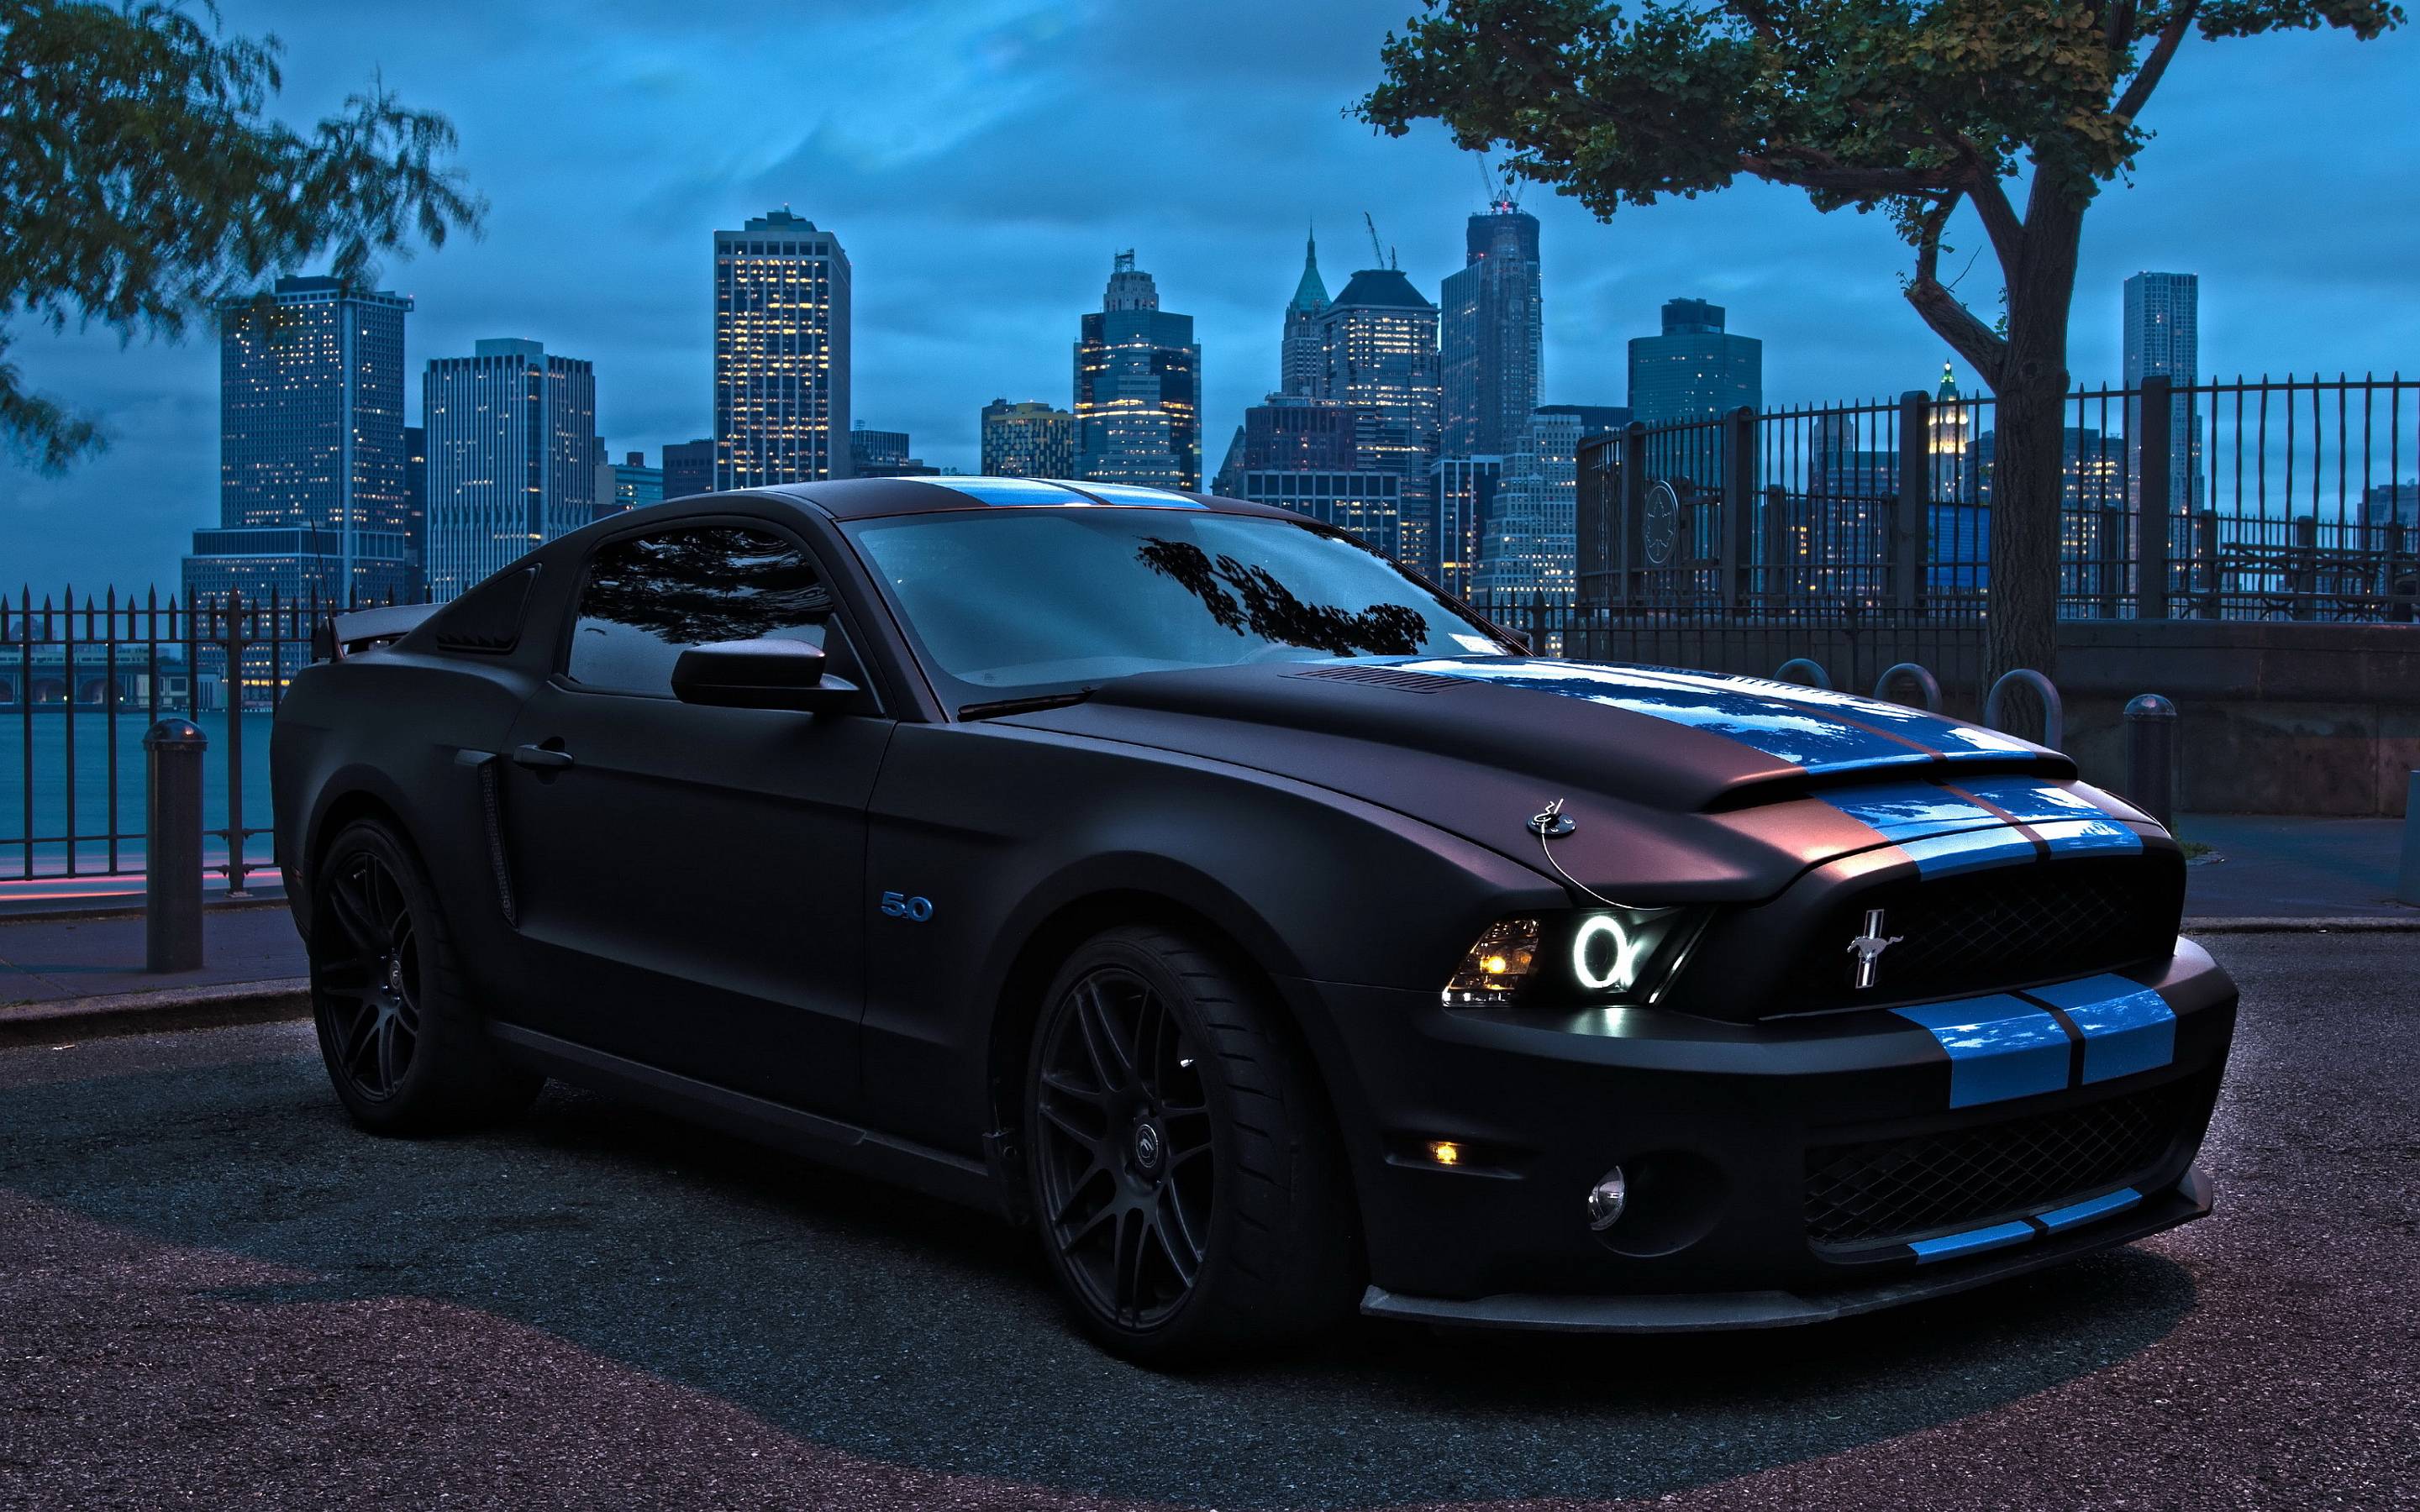 2014 Ford Mustang Wallpapers Top Free 2014 Ford Mustang Backgrounds Wallpaperaccess